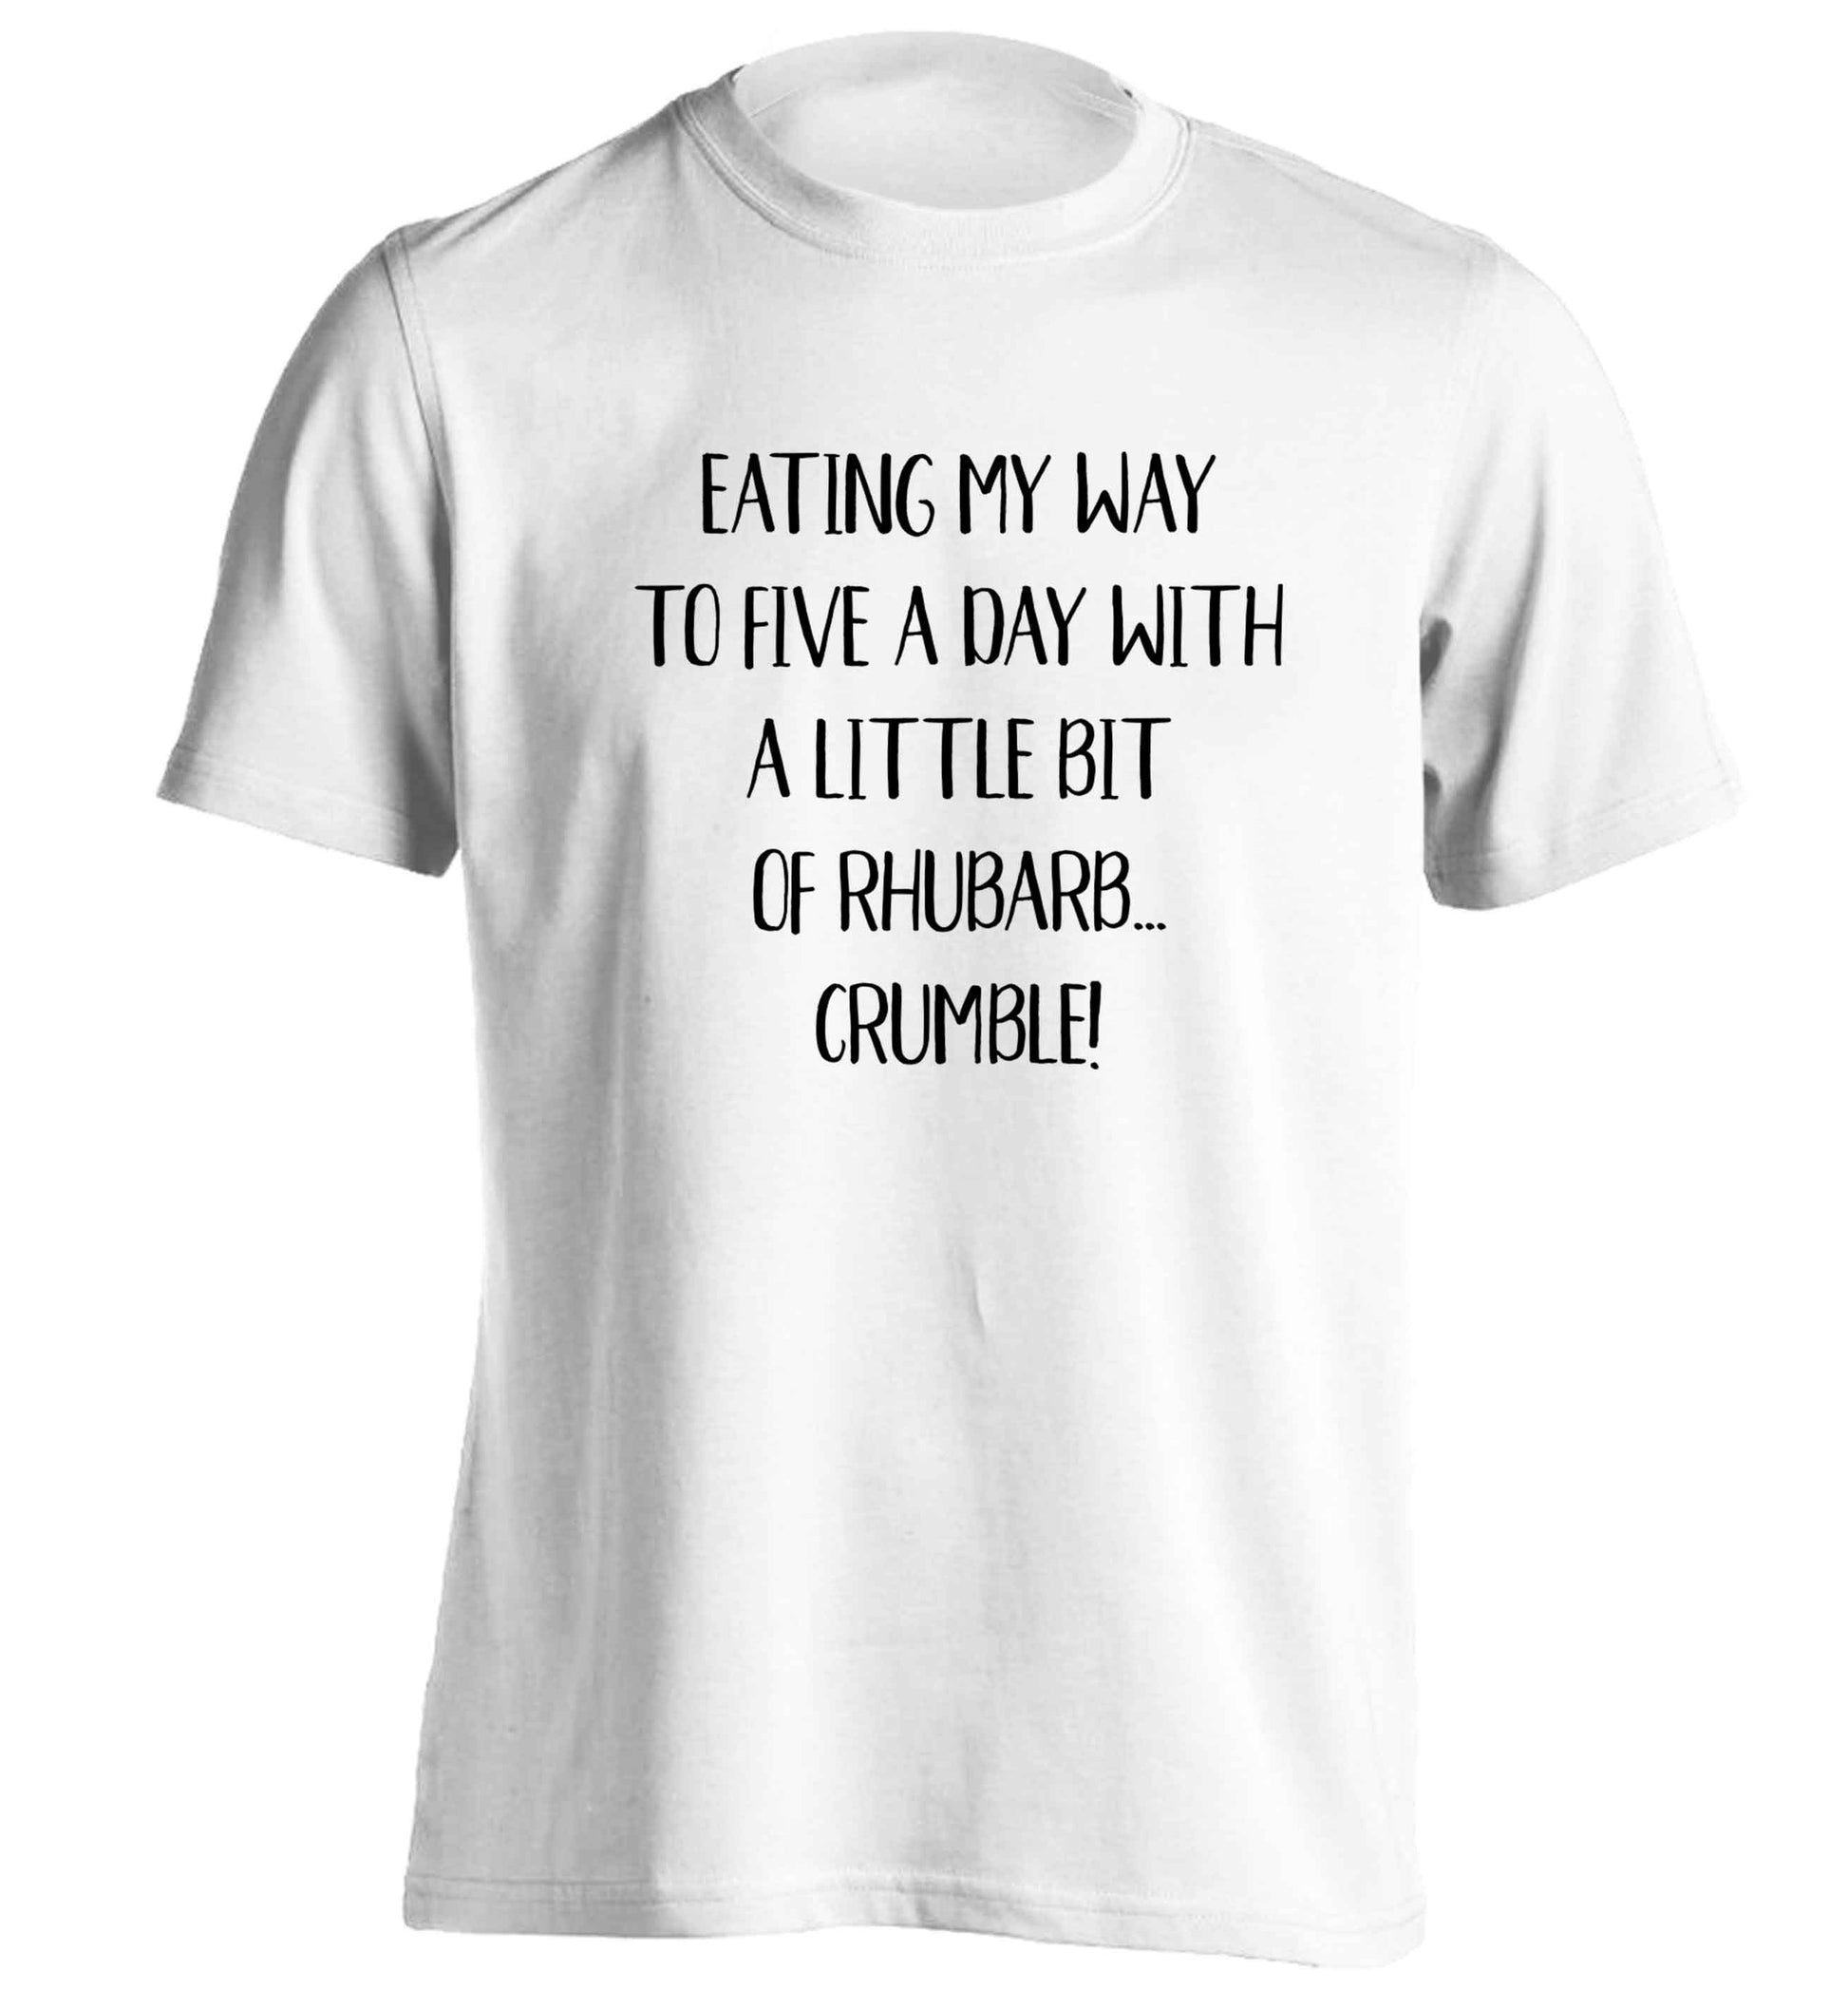 Eating my way to five a day with a little bit of rhubarb crumble adults unisex white Tshirt 2XL